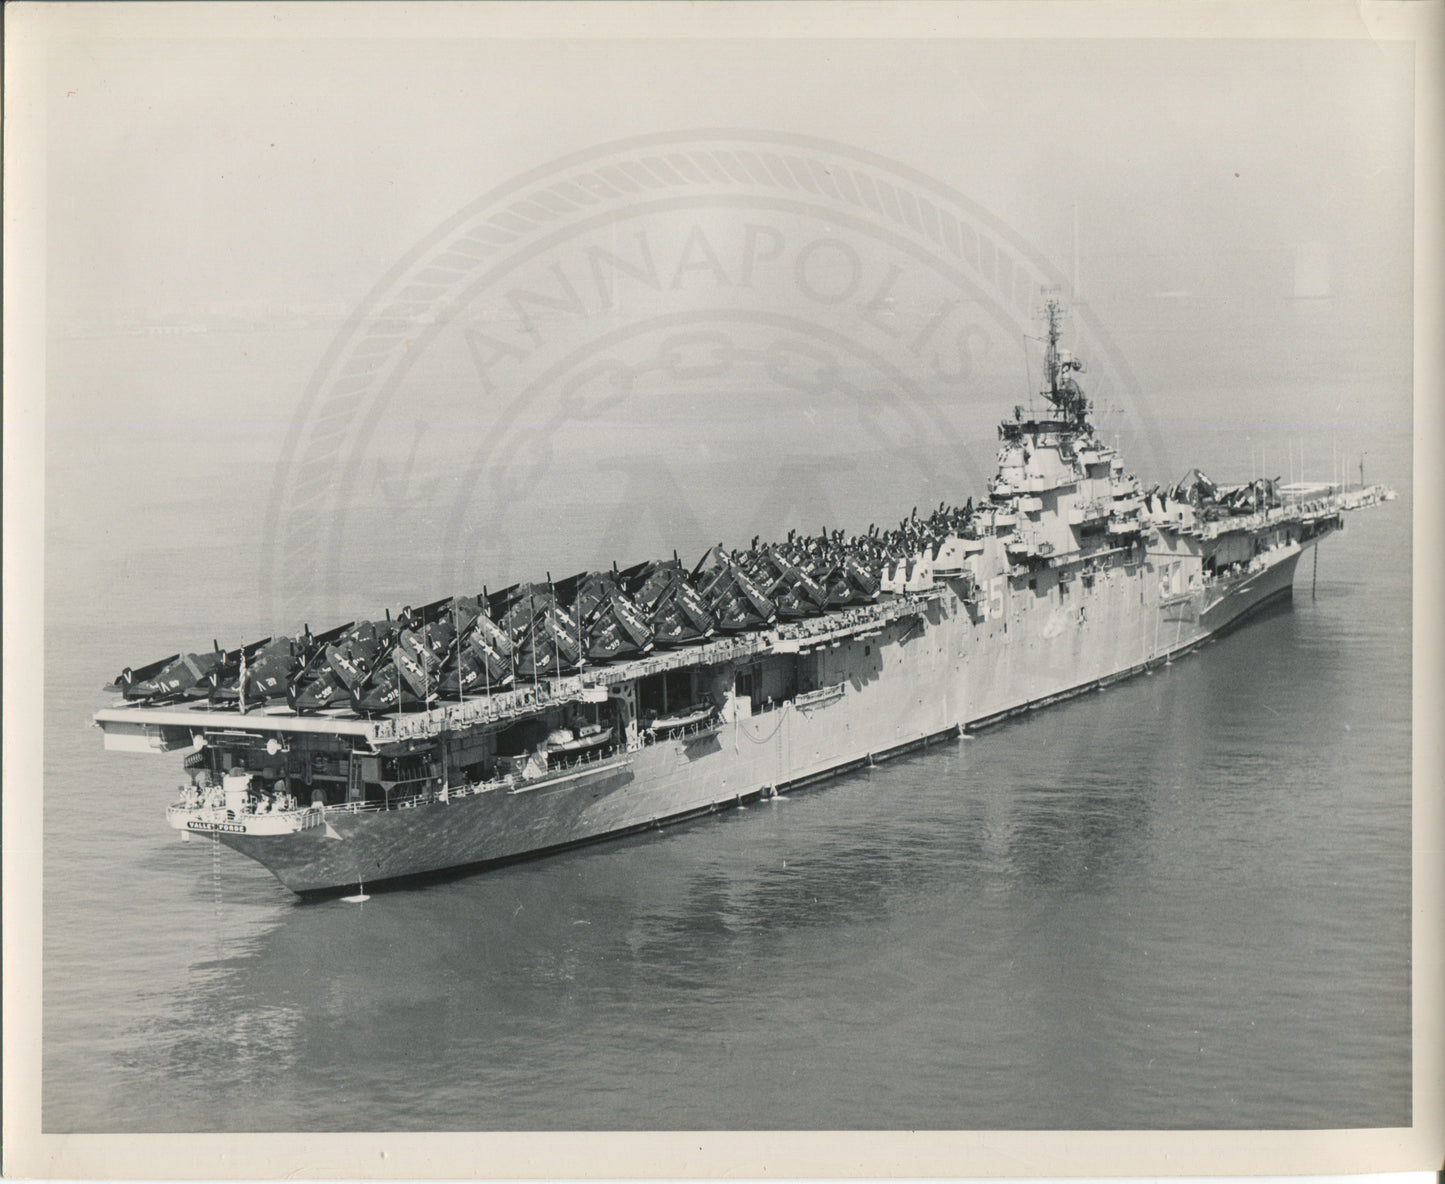 USS Valley Forge (CV-45) Aircraft Carrier